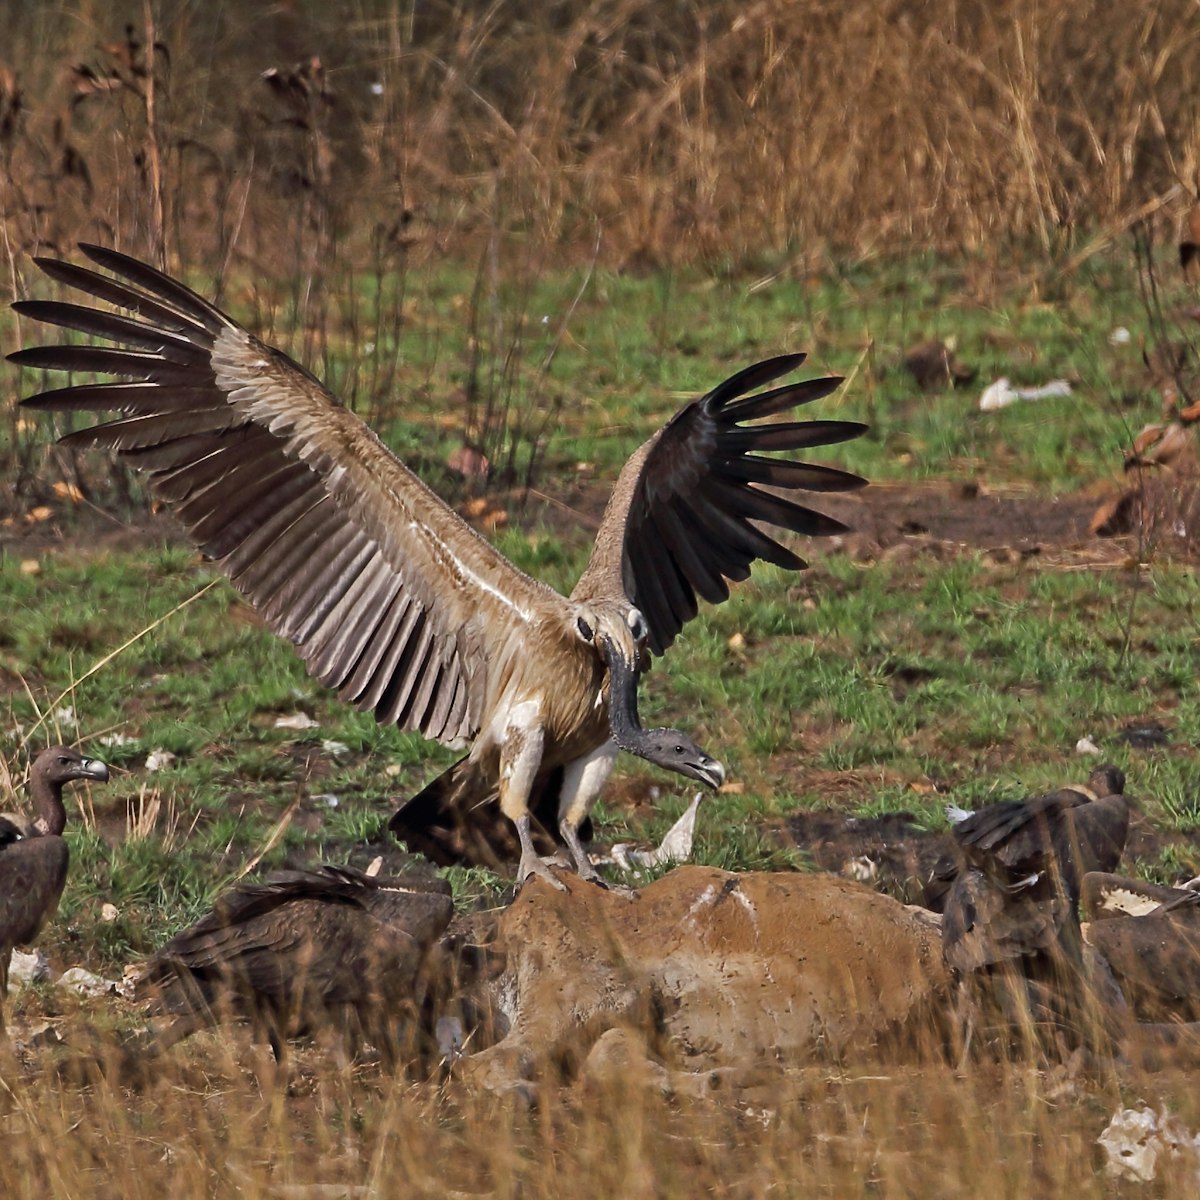 Vulture landing on a cow in Veal Krous Vulture Feeding Station, Cambodia.